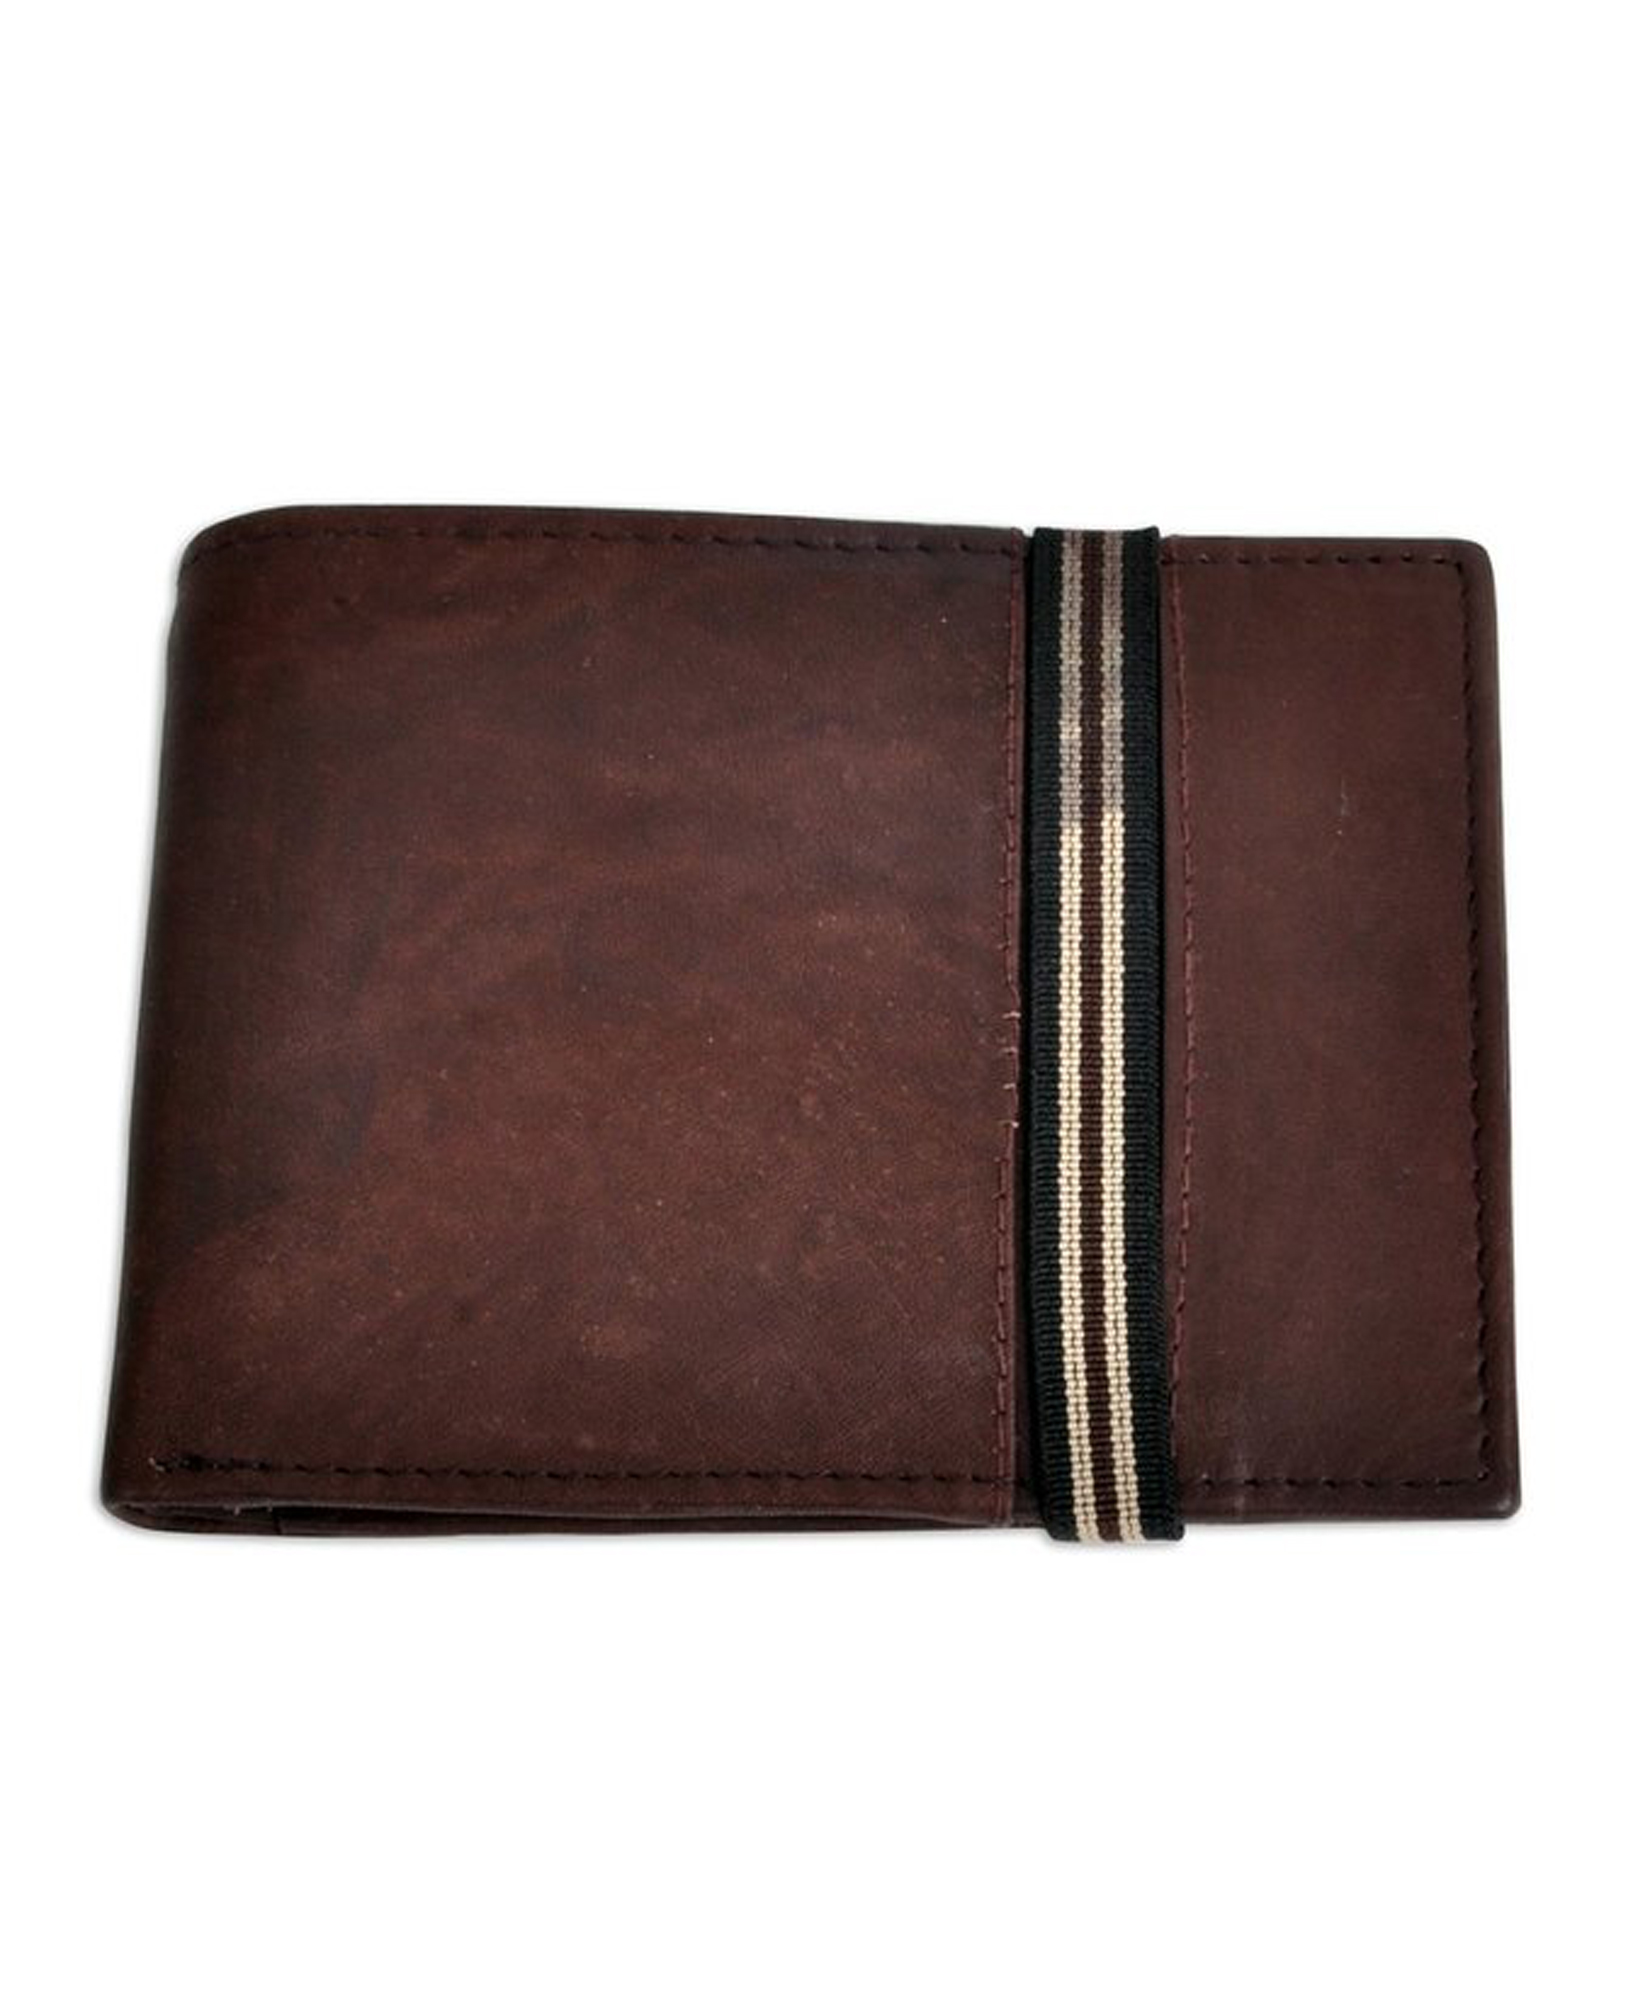 Men's Bi-Fold Genuine Leather Wallet with Elastic Band Fastening